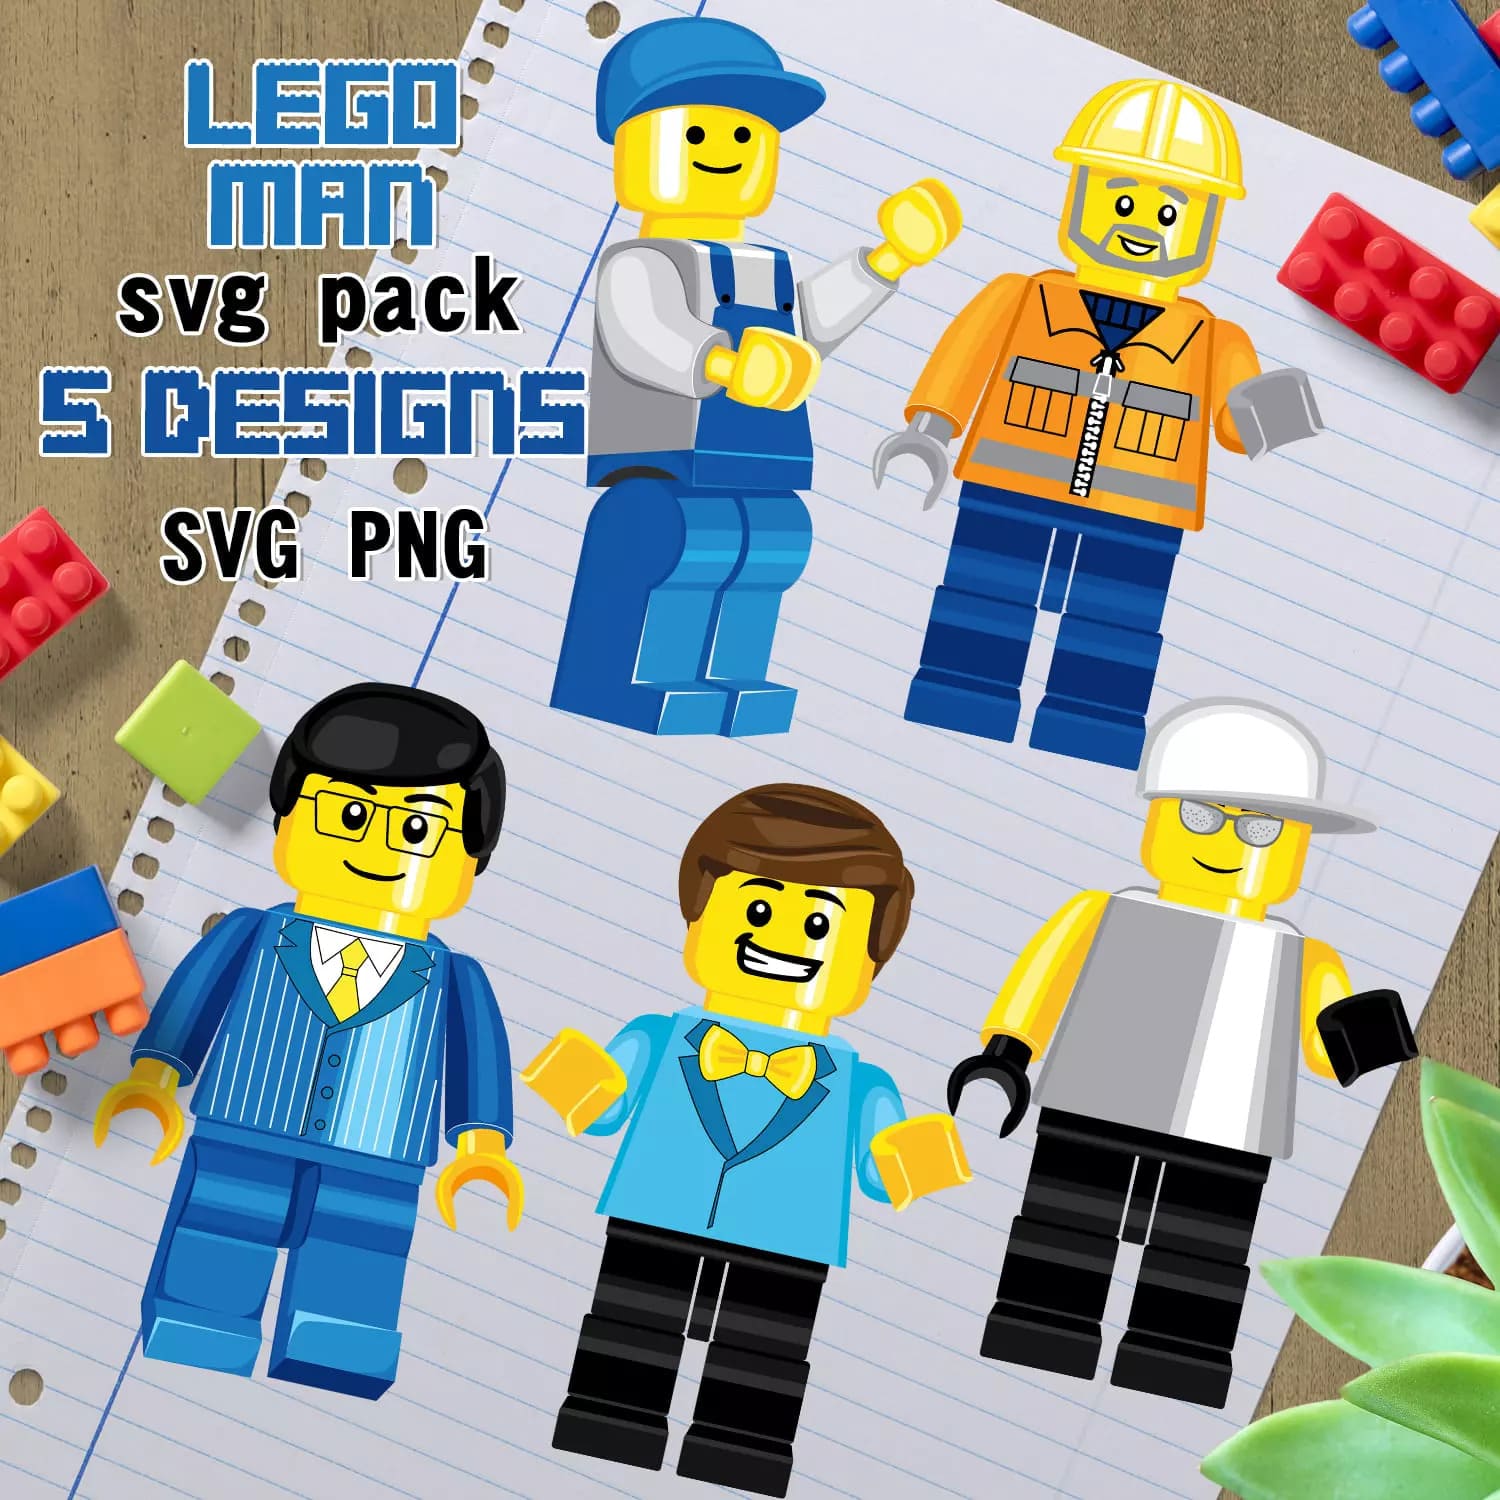 Lego Man SVG Preview.